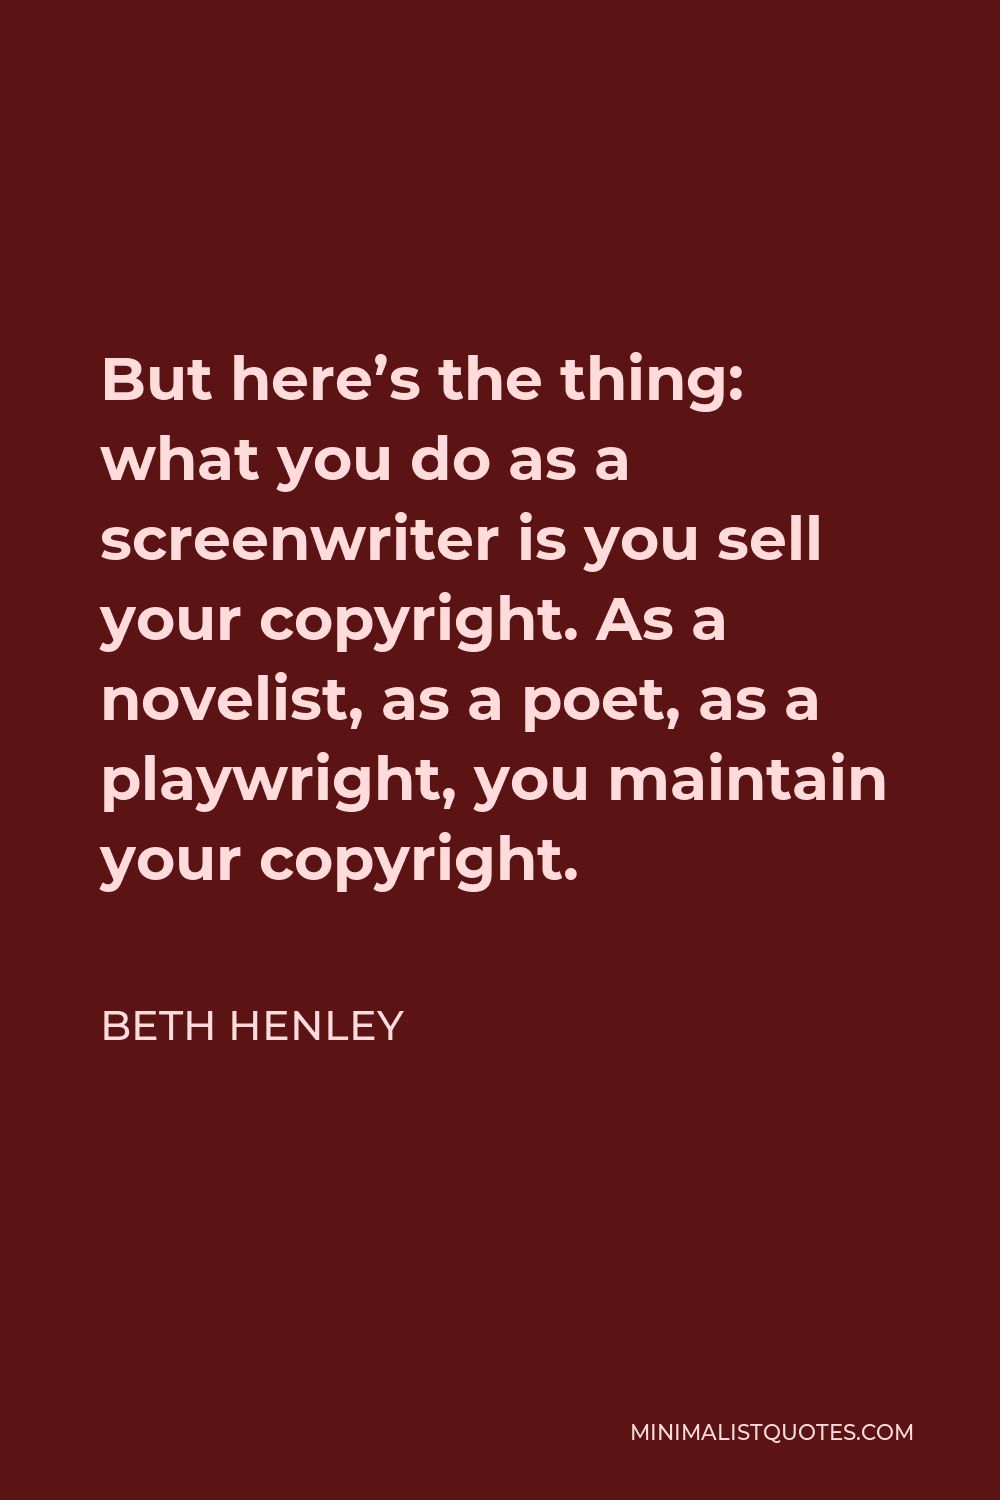 Beth Henley Quote - But here’s the thing: what you do as a screenwriter is you sell your copyright. As a novelist, as a poet, as a playwright, you maintain your copyright.